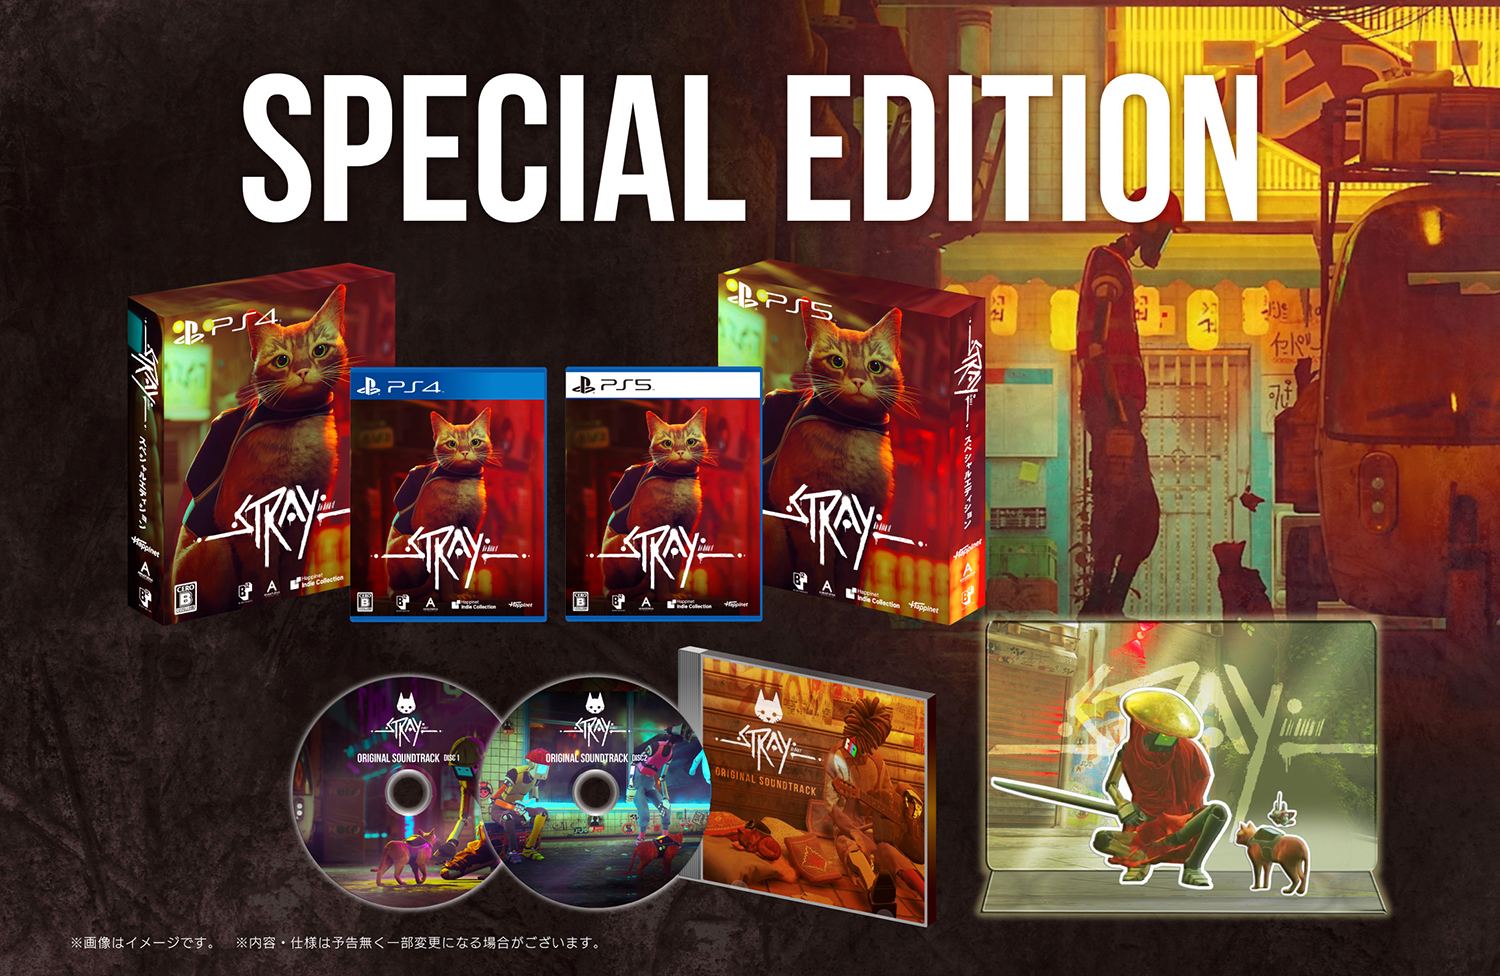 Stray Physical Edition Announce Trailer 